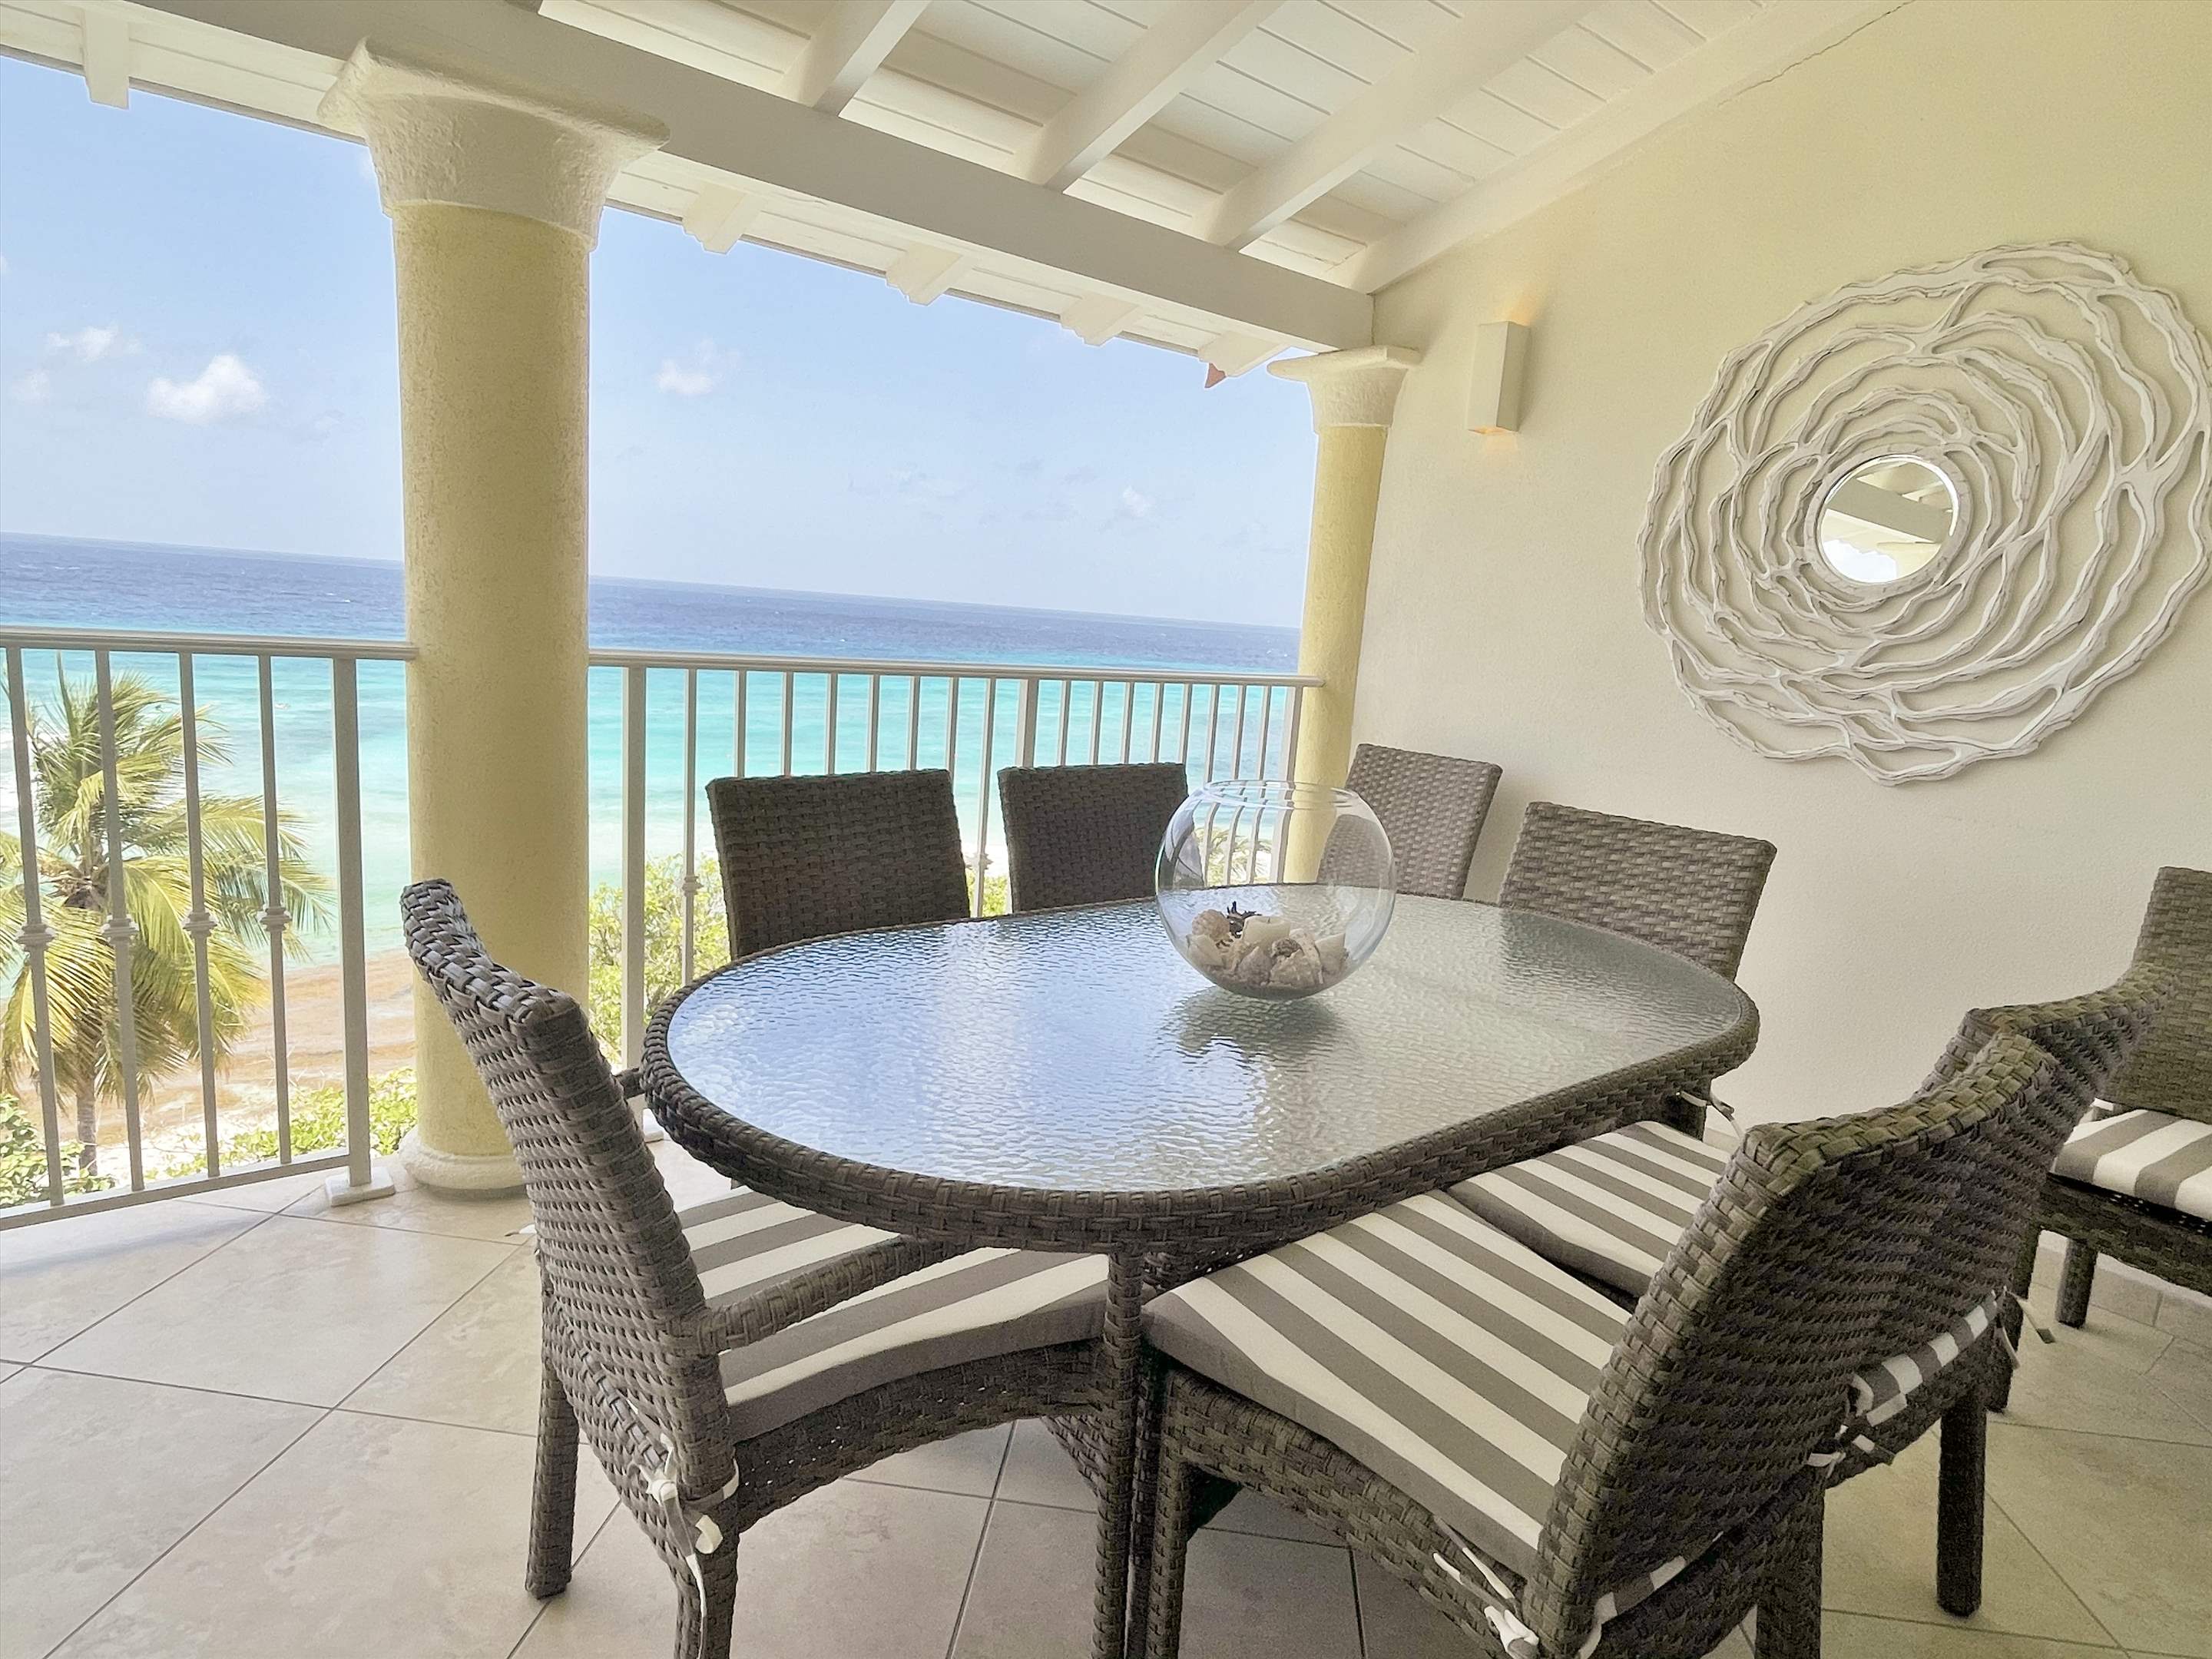 Sapphire Beach 505 , 2 Bedroom , 2 bedroom apartment in St. Lawrence Gap & South Coast, Barbados Photo #3